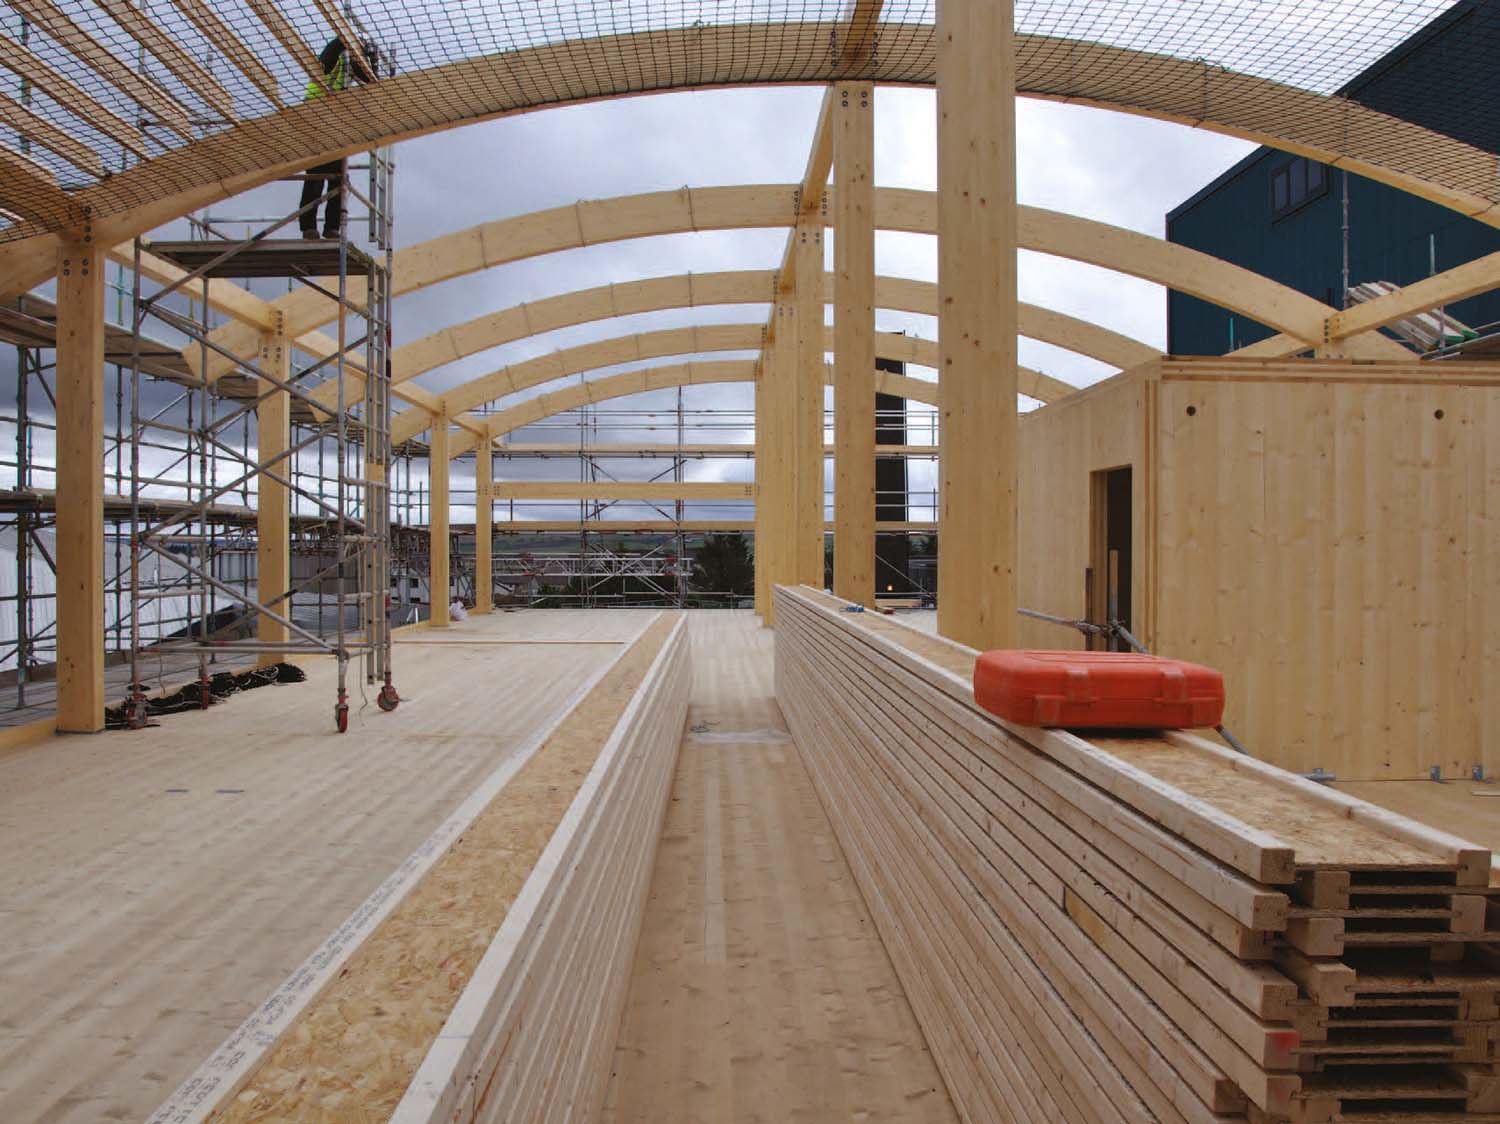 A builder working on the curved roof at Thurso College during its construction. There are long planks of wood in the centre of the space.